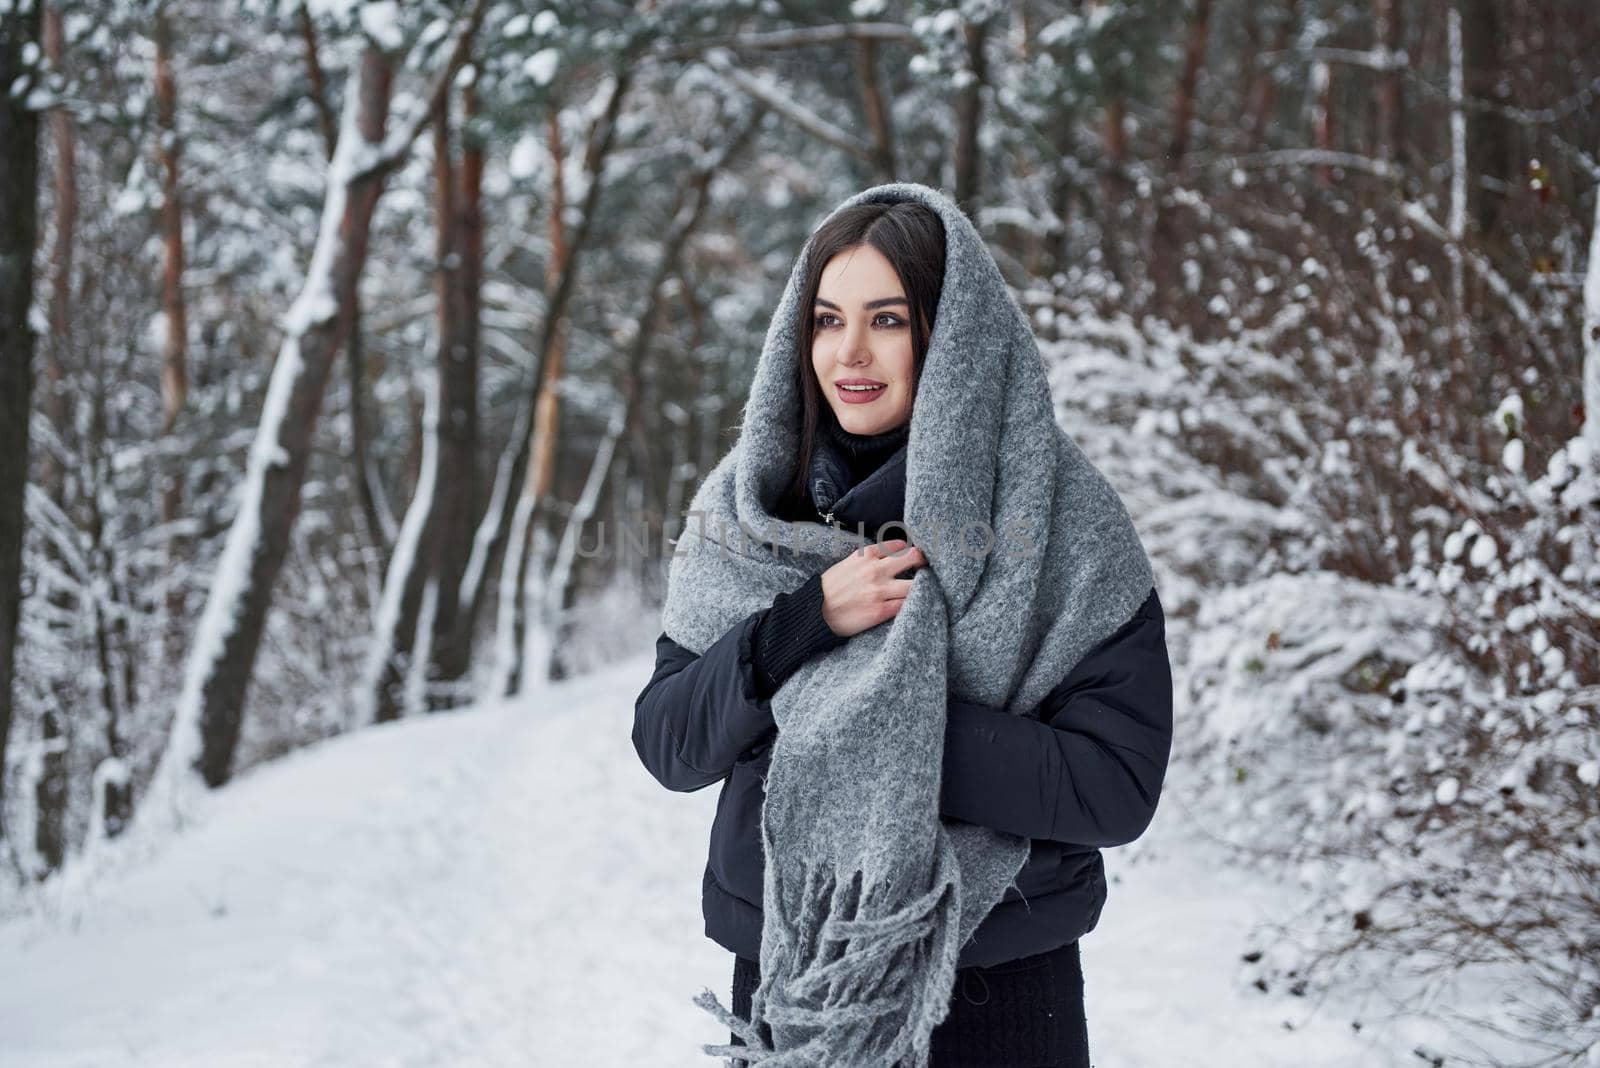 Winter is charming. Portrait of charming woman in the black jacket and grey scarf in the snowy cold forest.